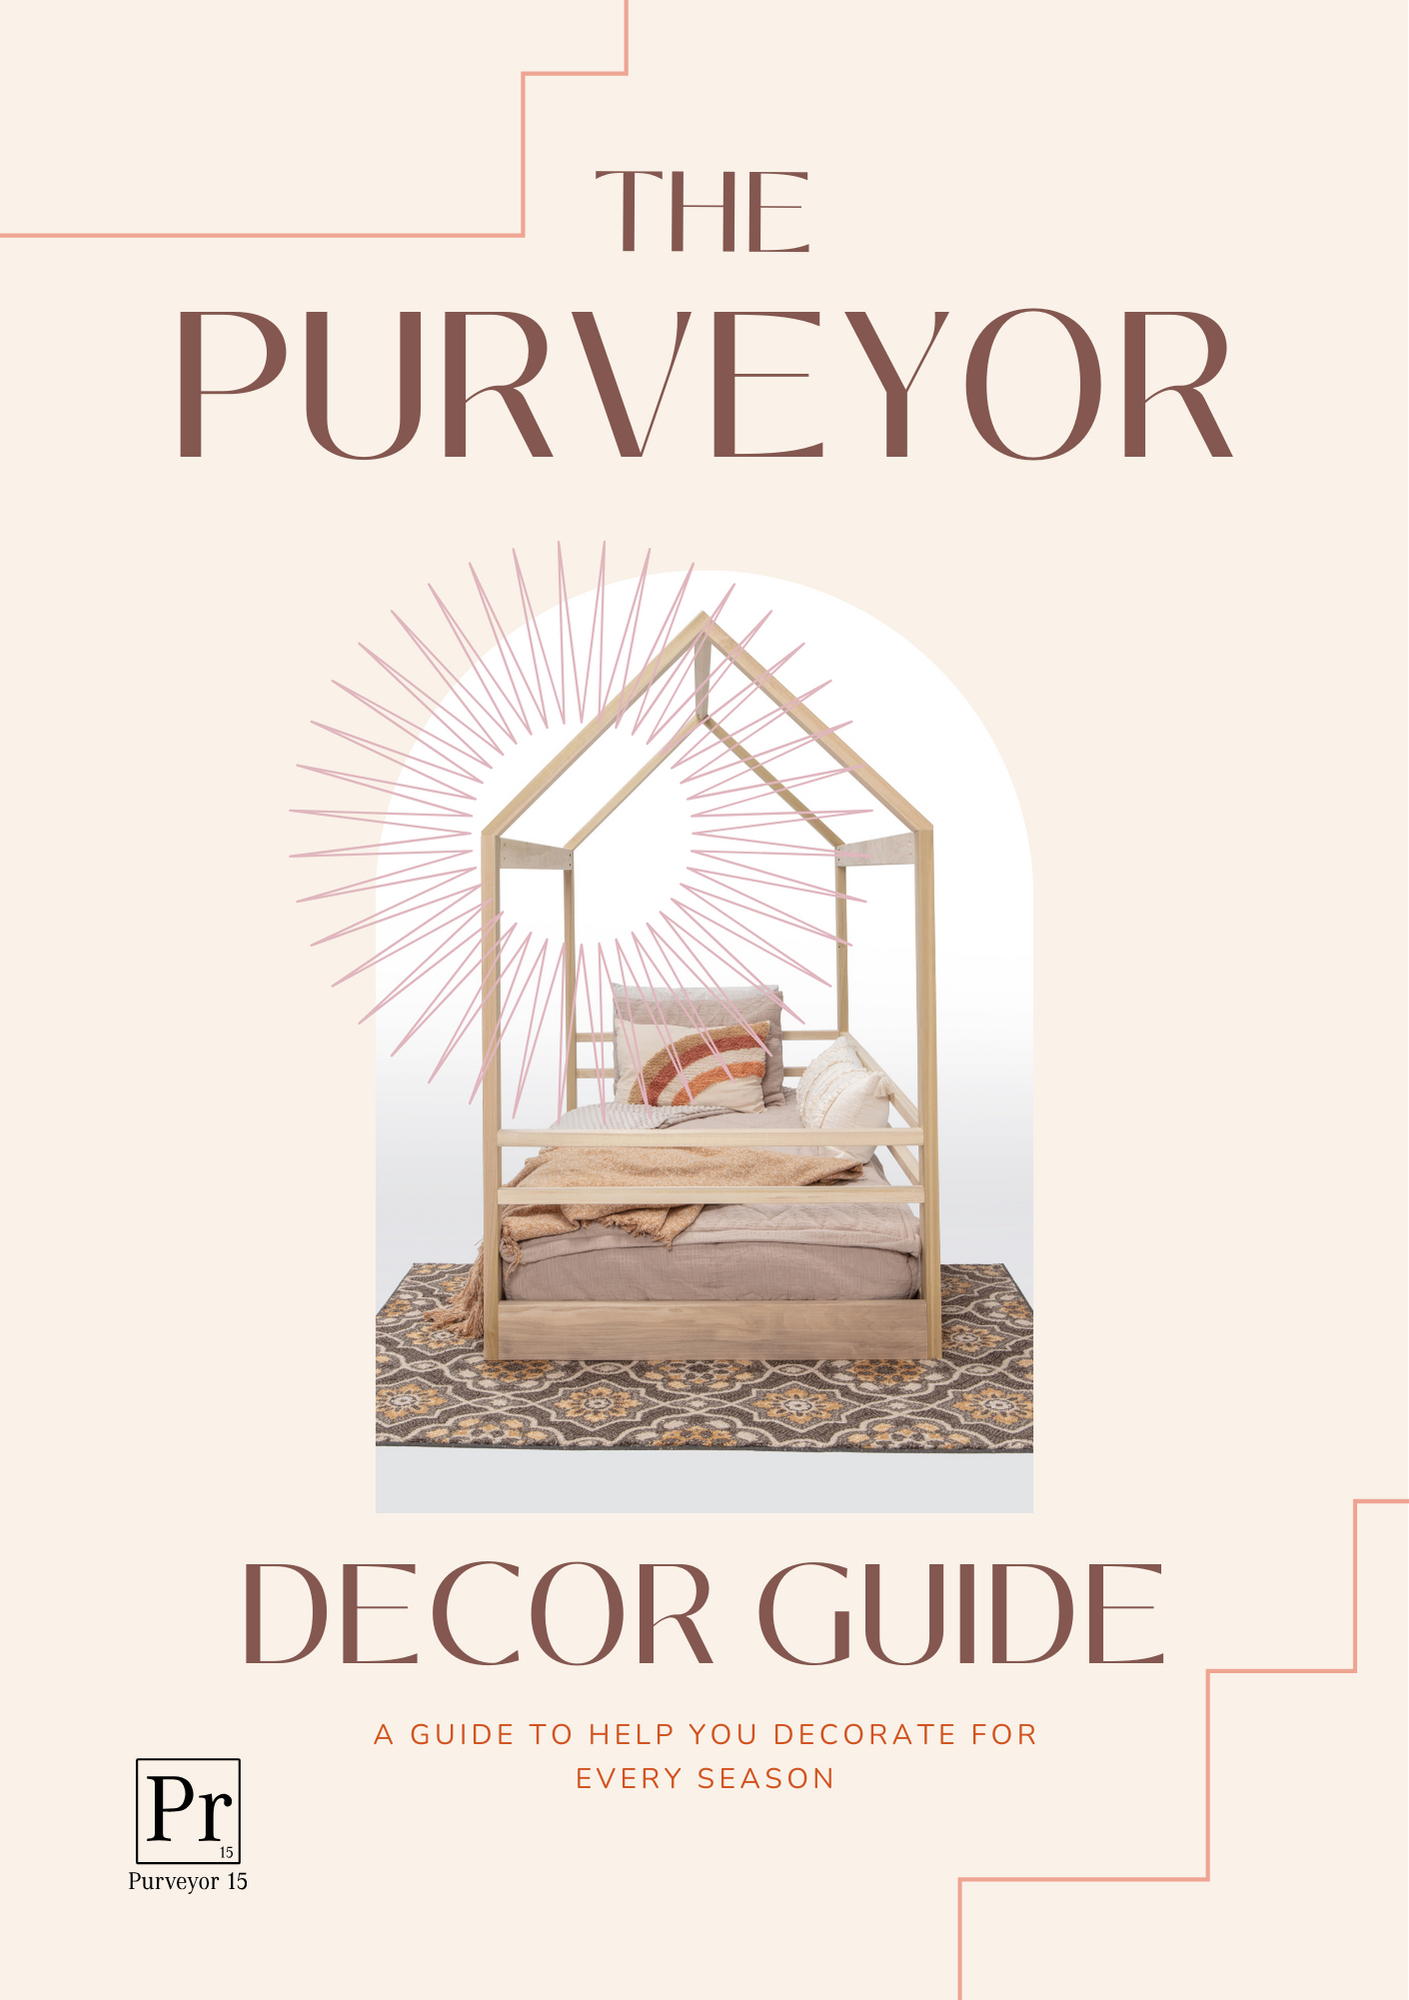 Decor Guide: 50 Ways to Decorate Your Purveyor Bed